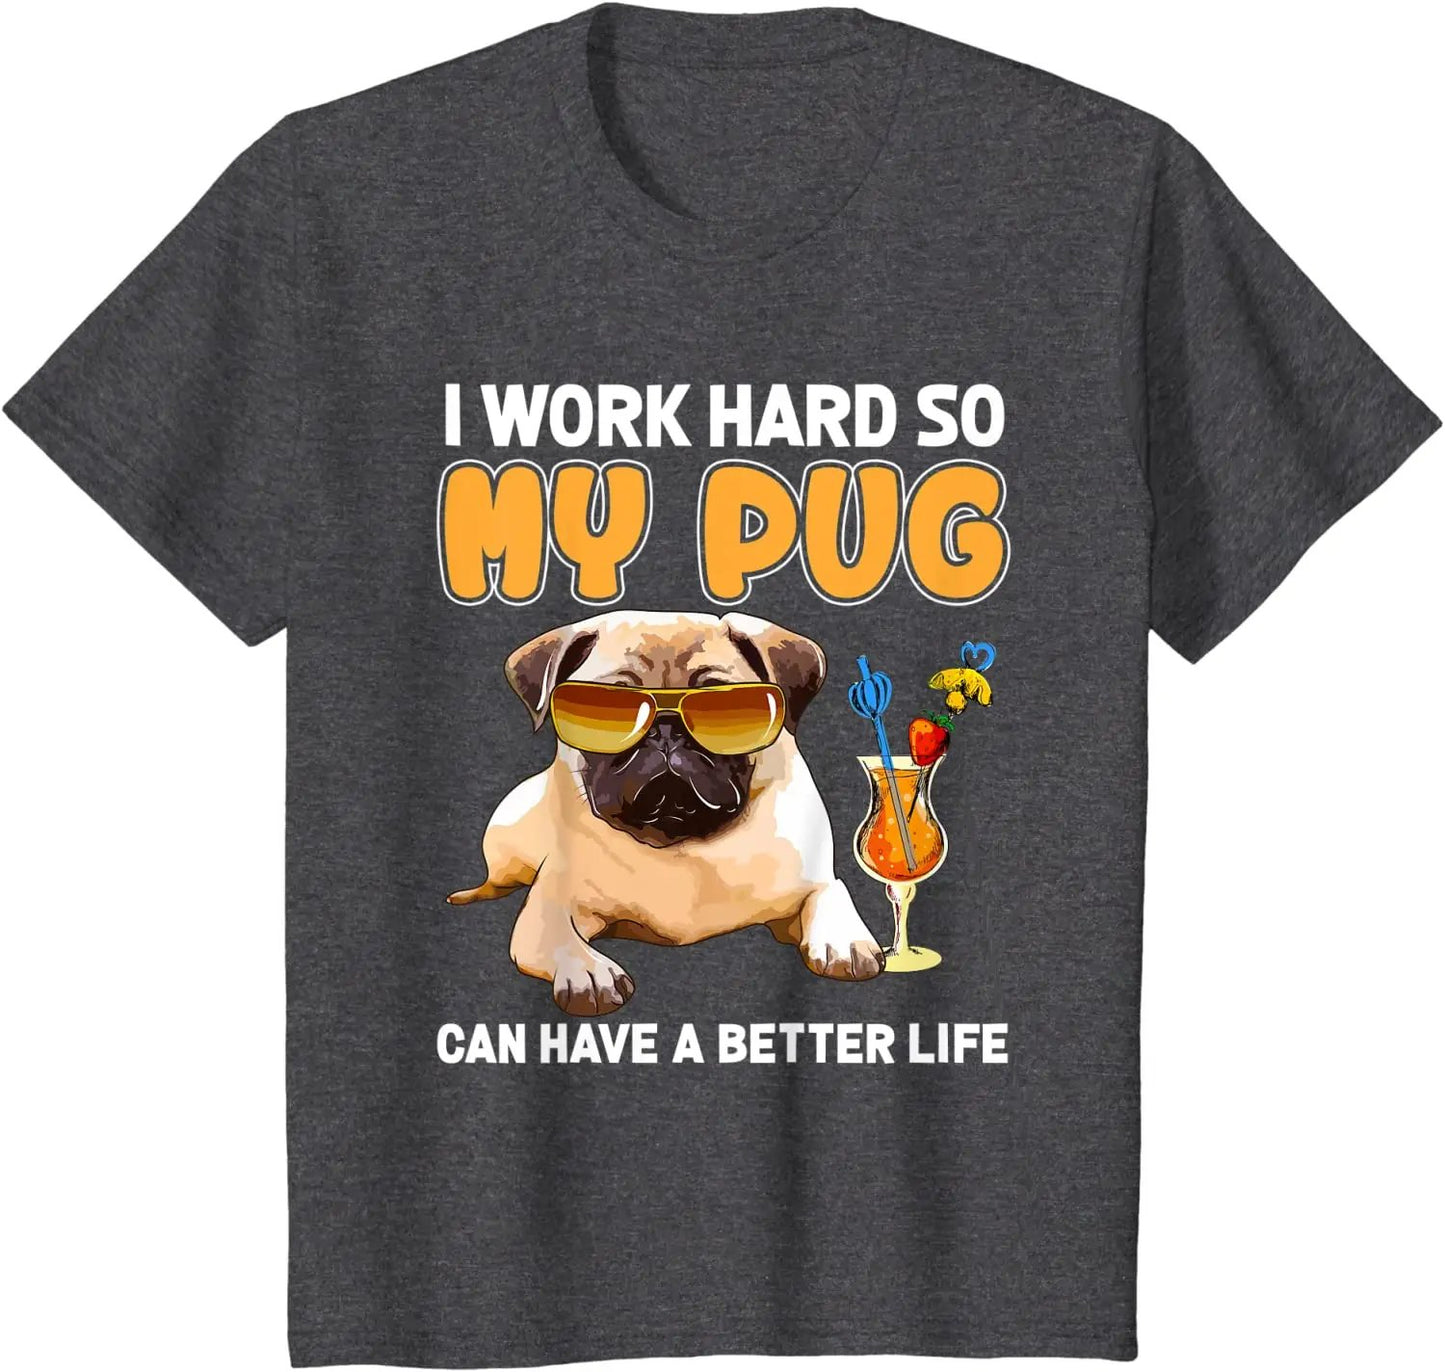 Funny Pug Shirt I Work Hard so my Pug Can Have a Better Life T Shirt